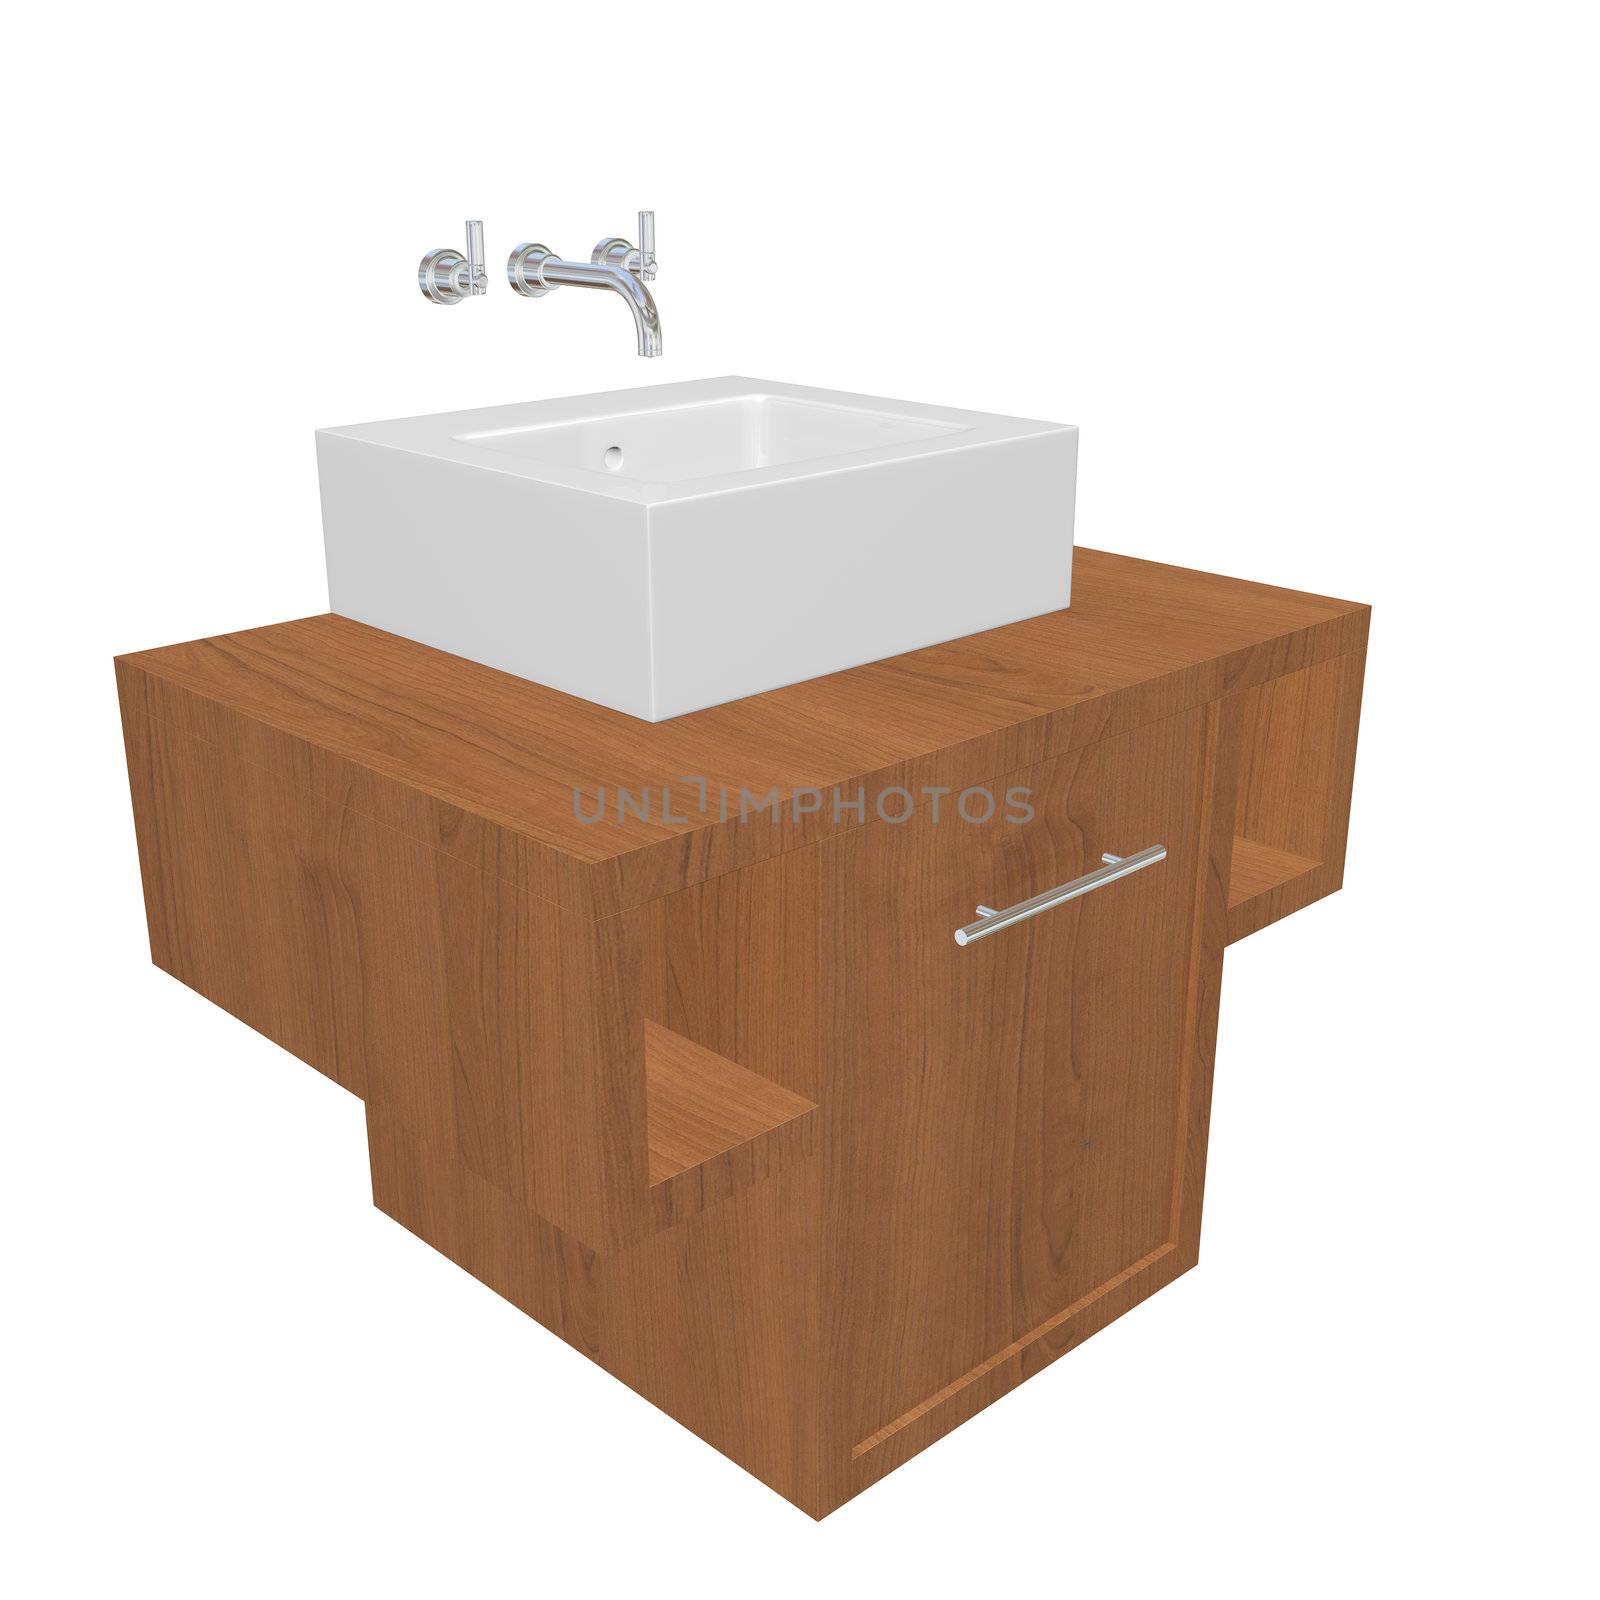 Modern bathroom sink set with ceramic wash basin, chrome fixtures, and wooden cabinet, 3d illustration, isolated against a white background